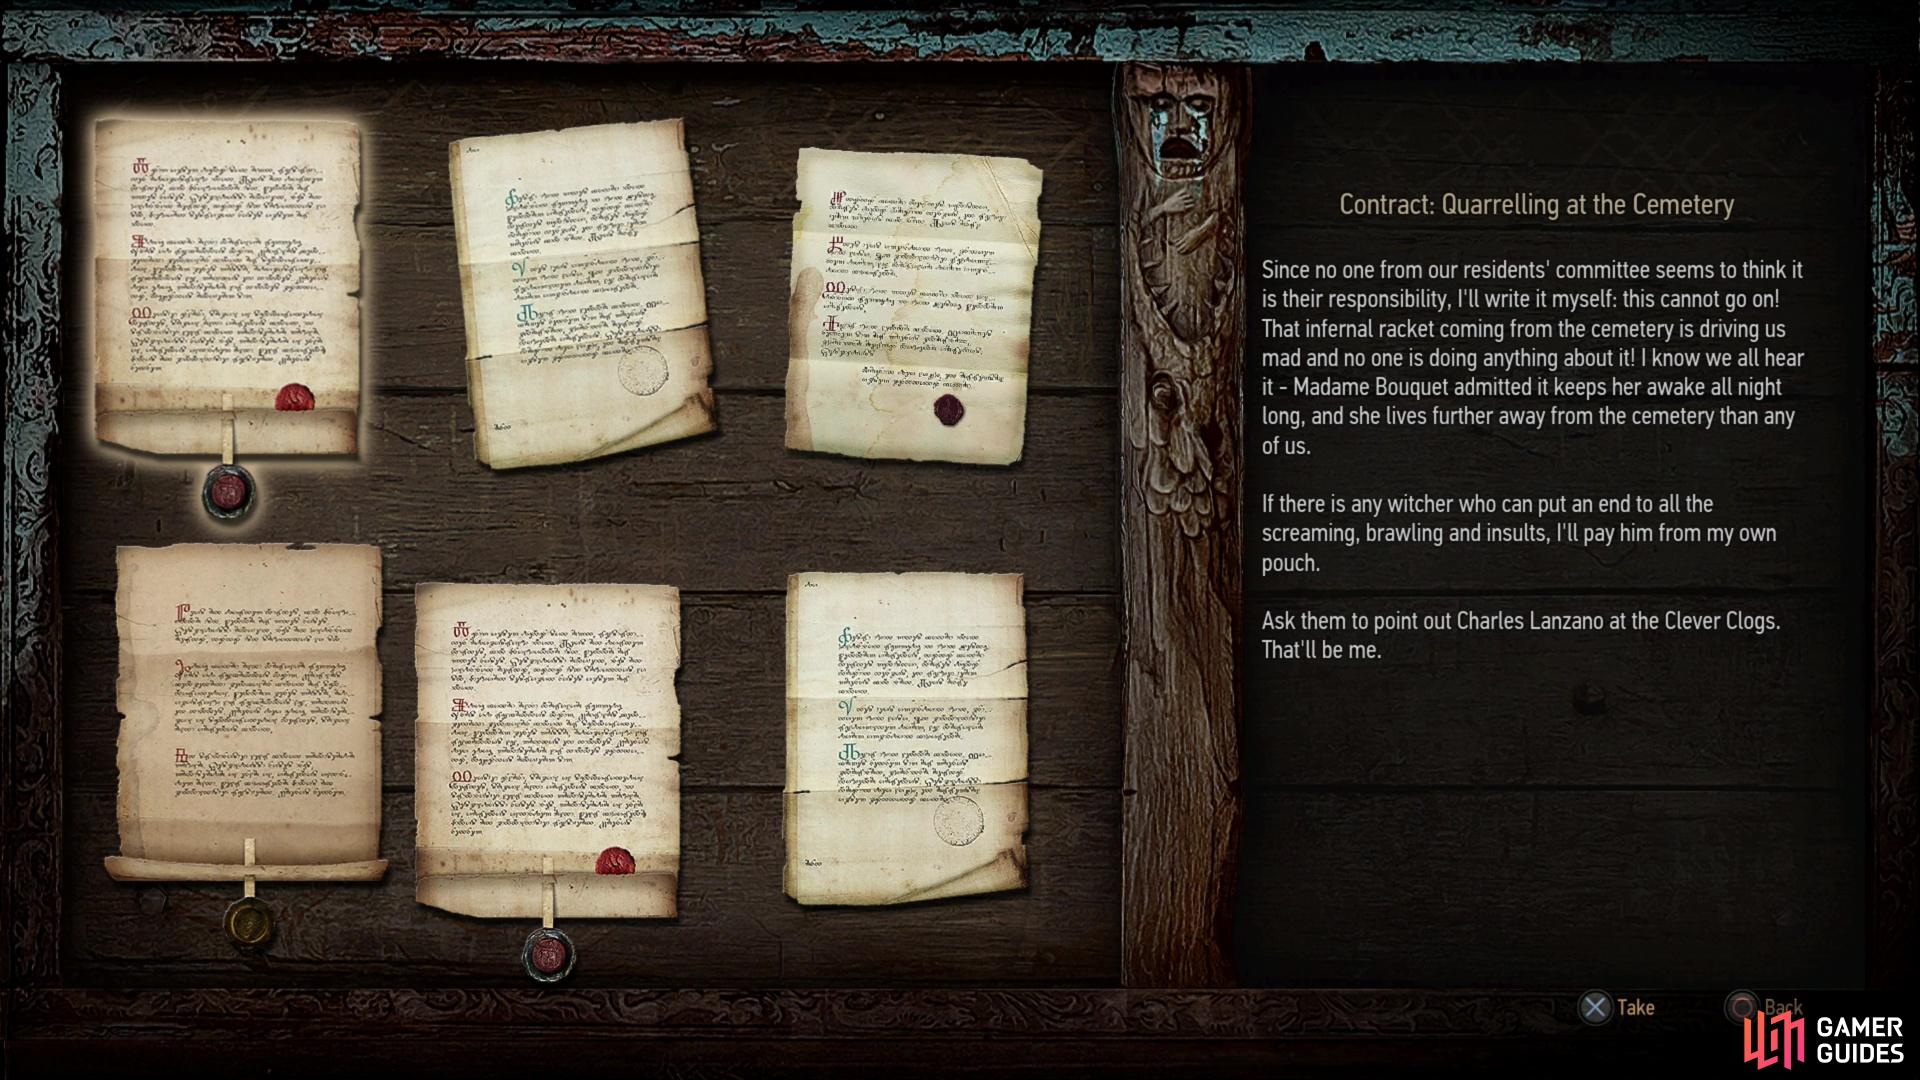 Start this quest by searching the Notice Board in Beauclair for the post Contract: Quarreling at the Cemetery,